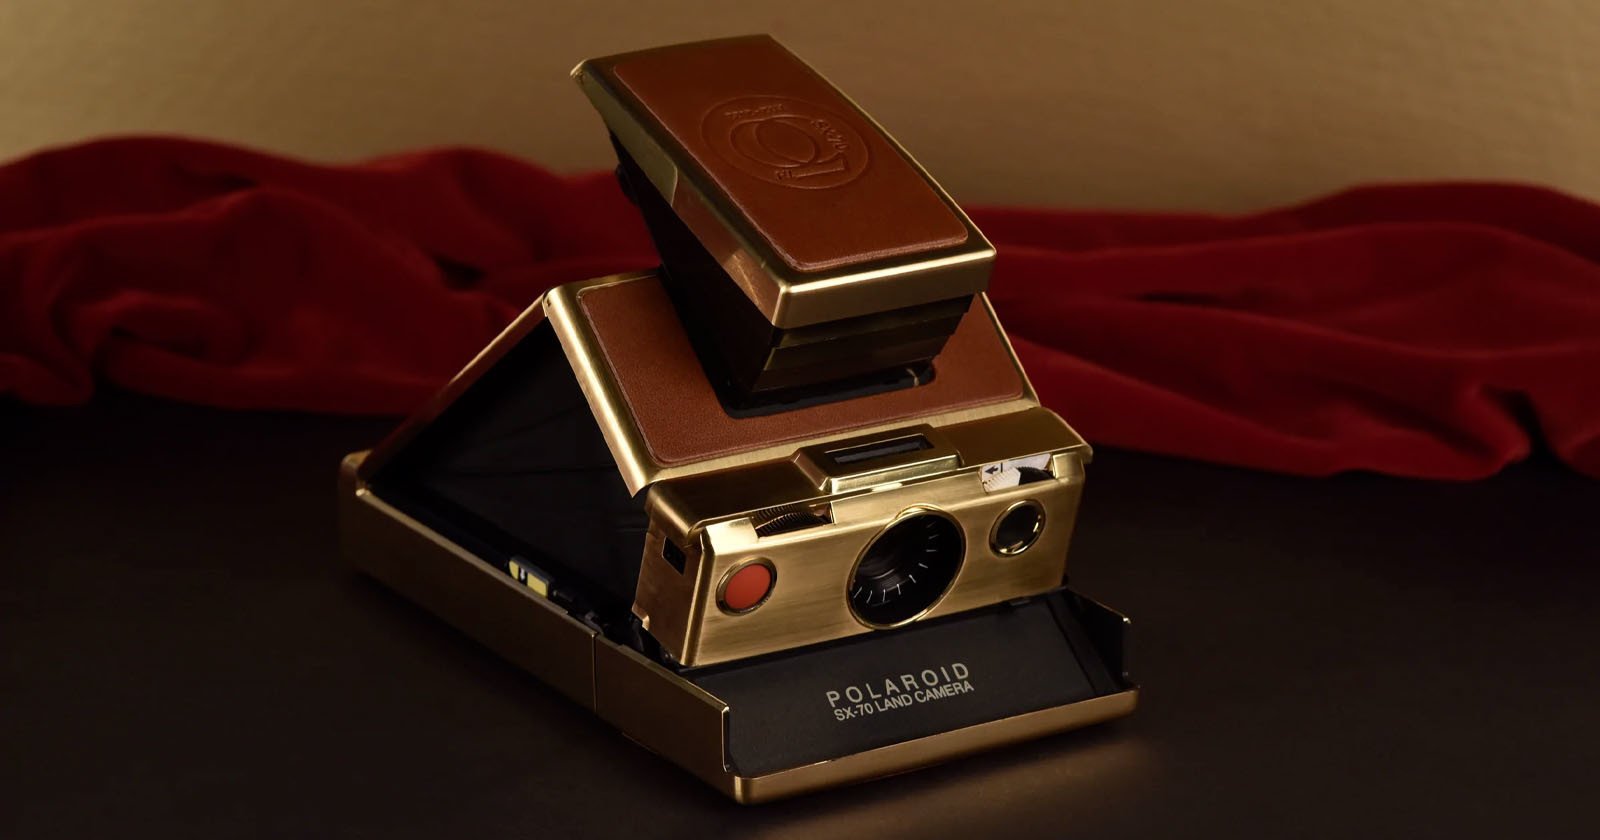  fully-functional 24k gold polaroid honors years sx-70 format 